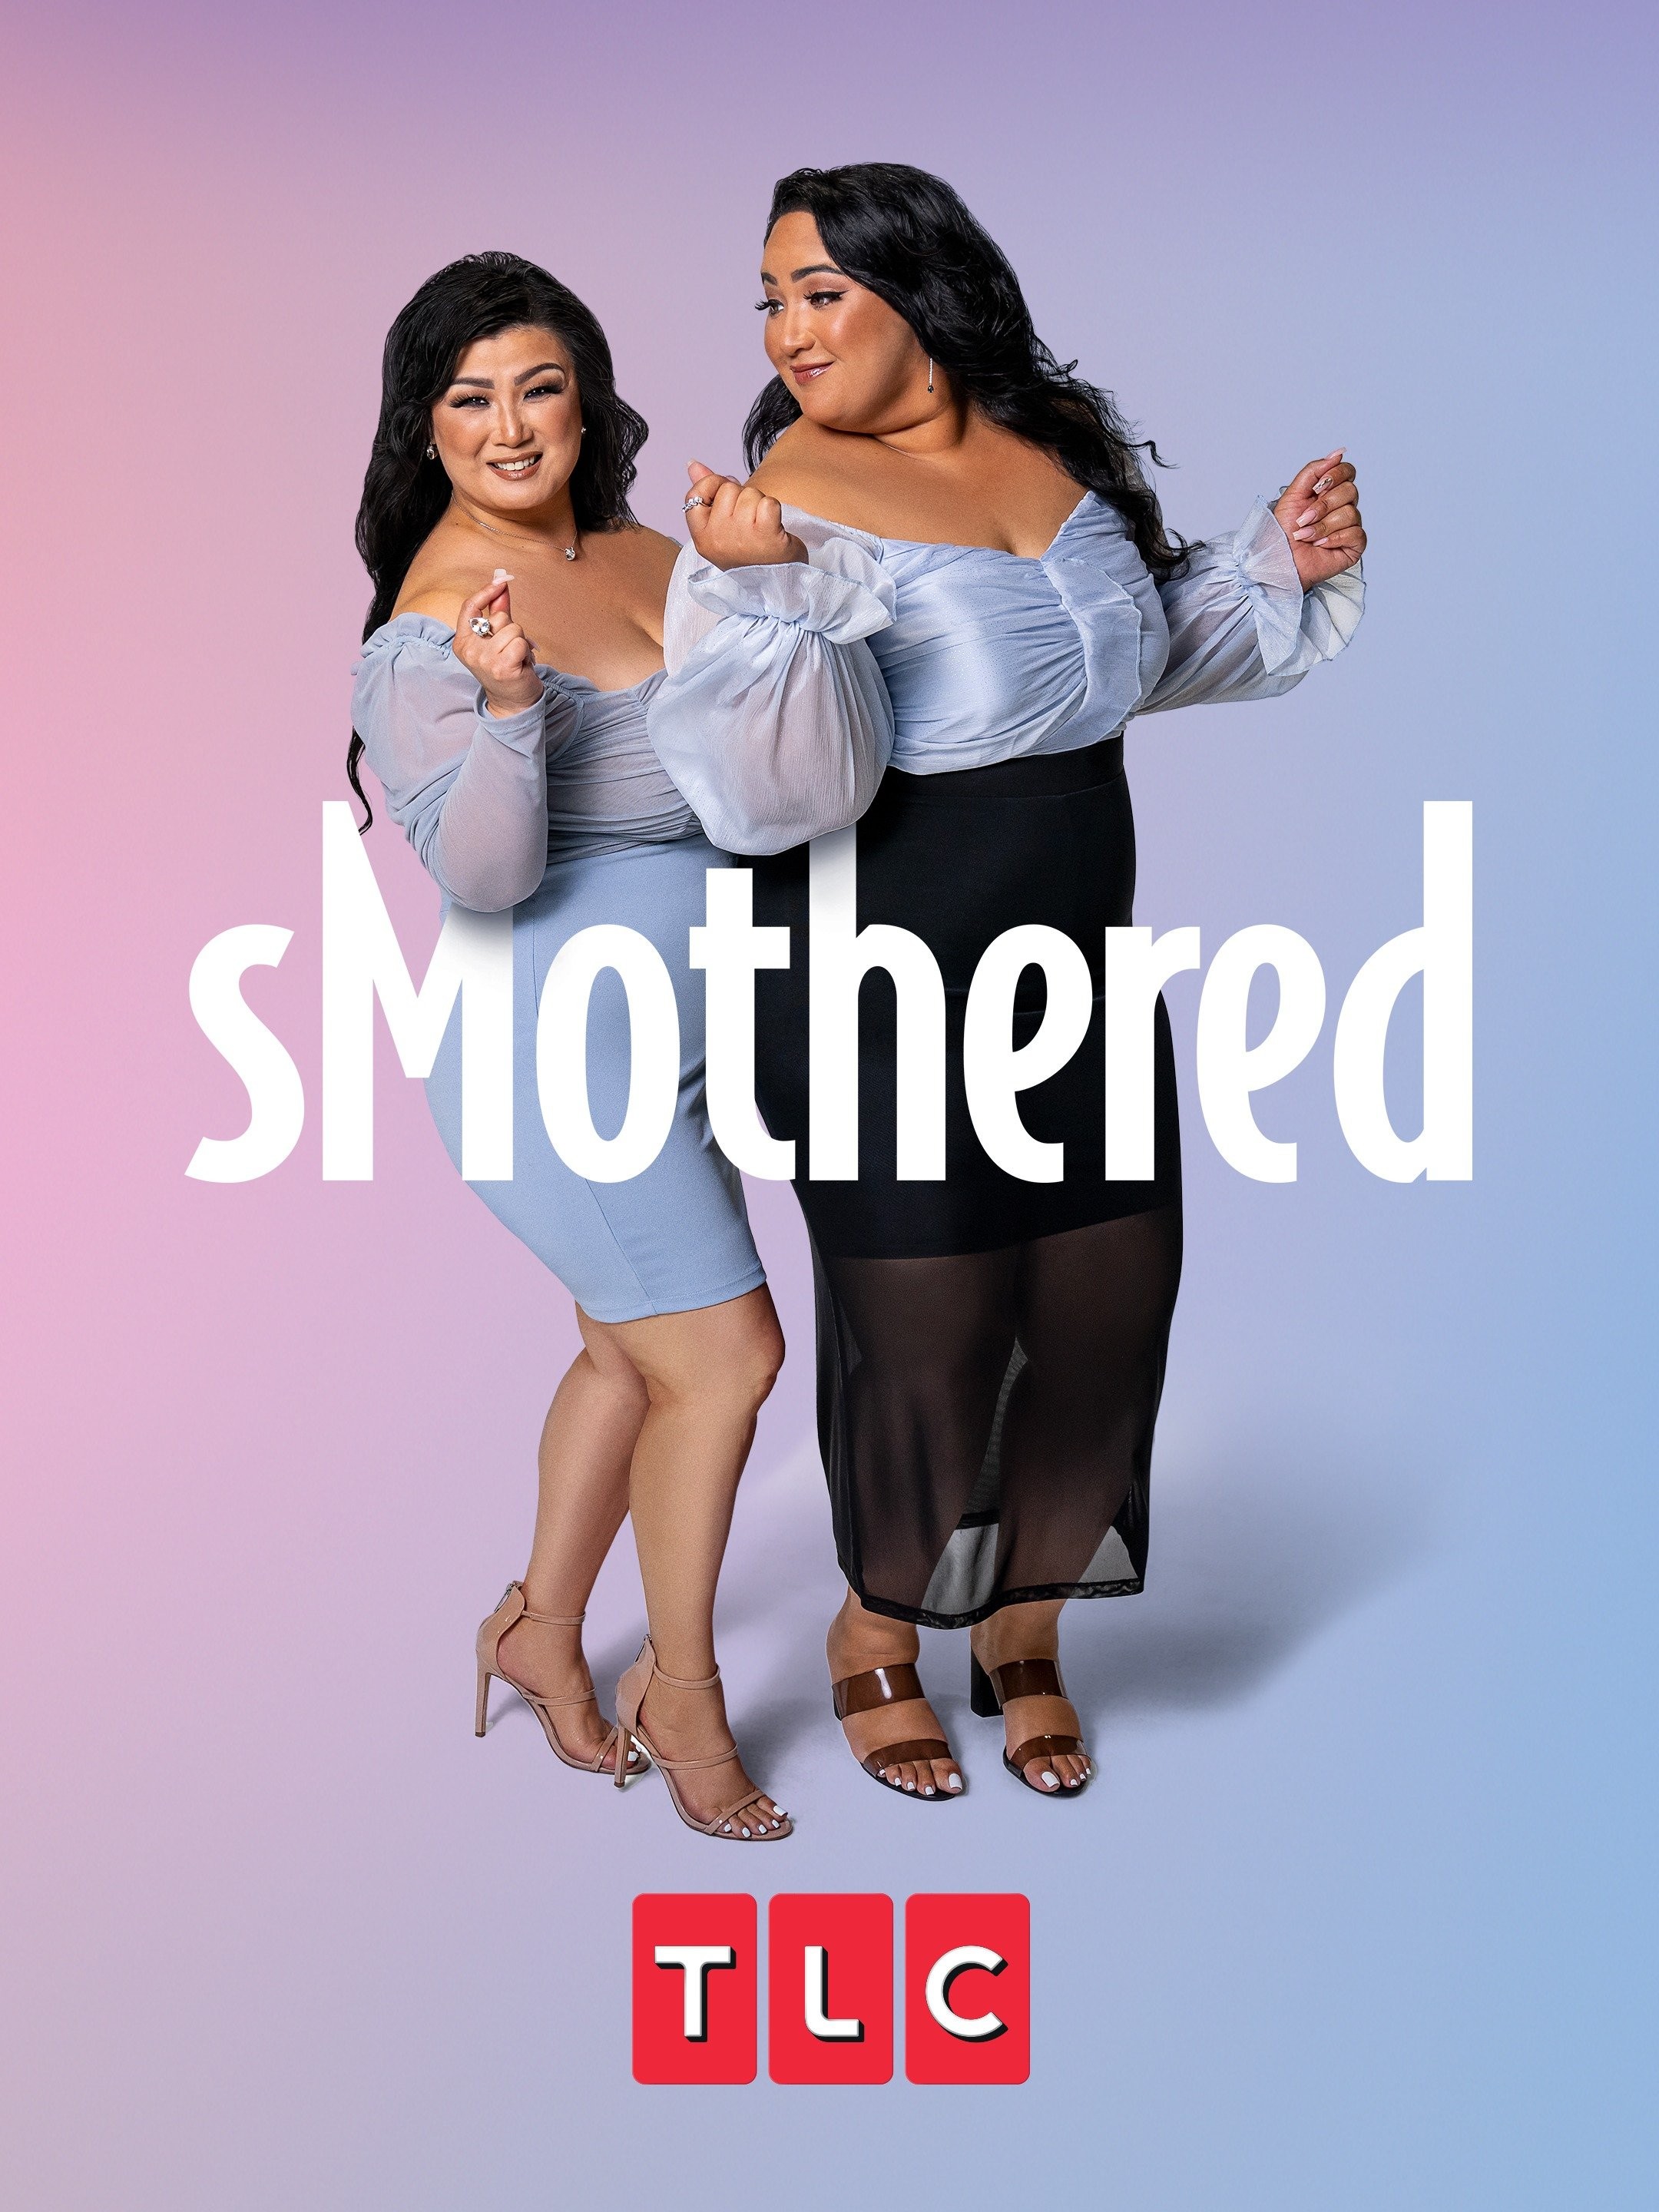 The Untold Truth Of sMothered